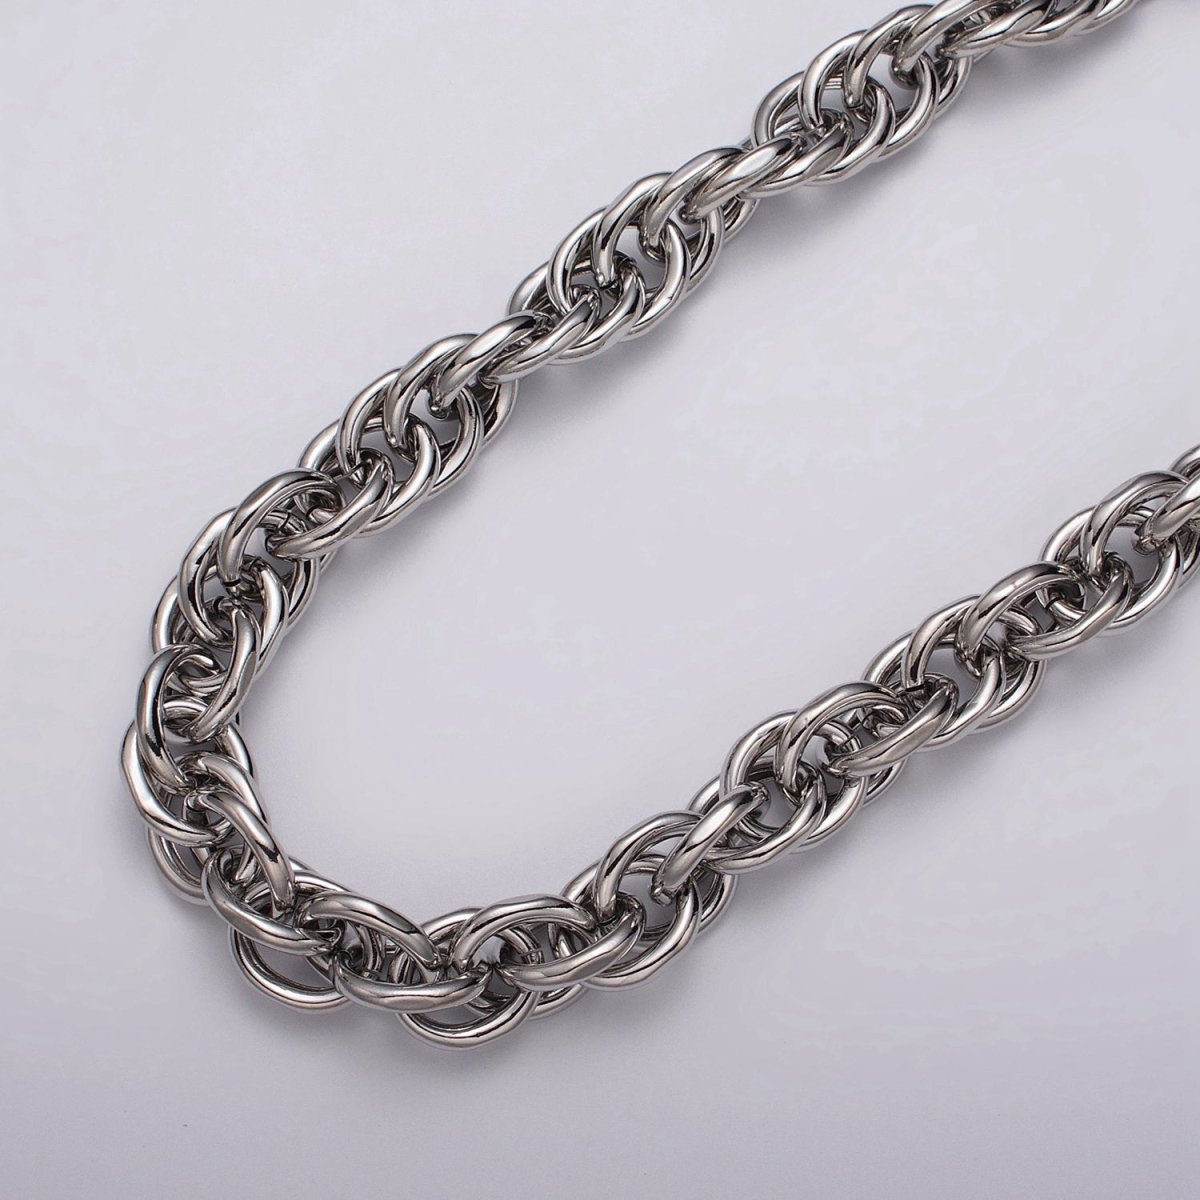 Unsoldered Gold Espiga Spiga Wheat Chain 13mm, 17.5mm Width for Statement Jewelry Unfinished Chain by Yard in Gold & Silver Unsoldered | ROLL-1183 ~ ROLL-1186 Clearance Pricing - DLUXCA